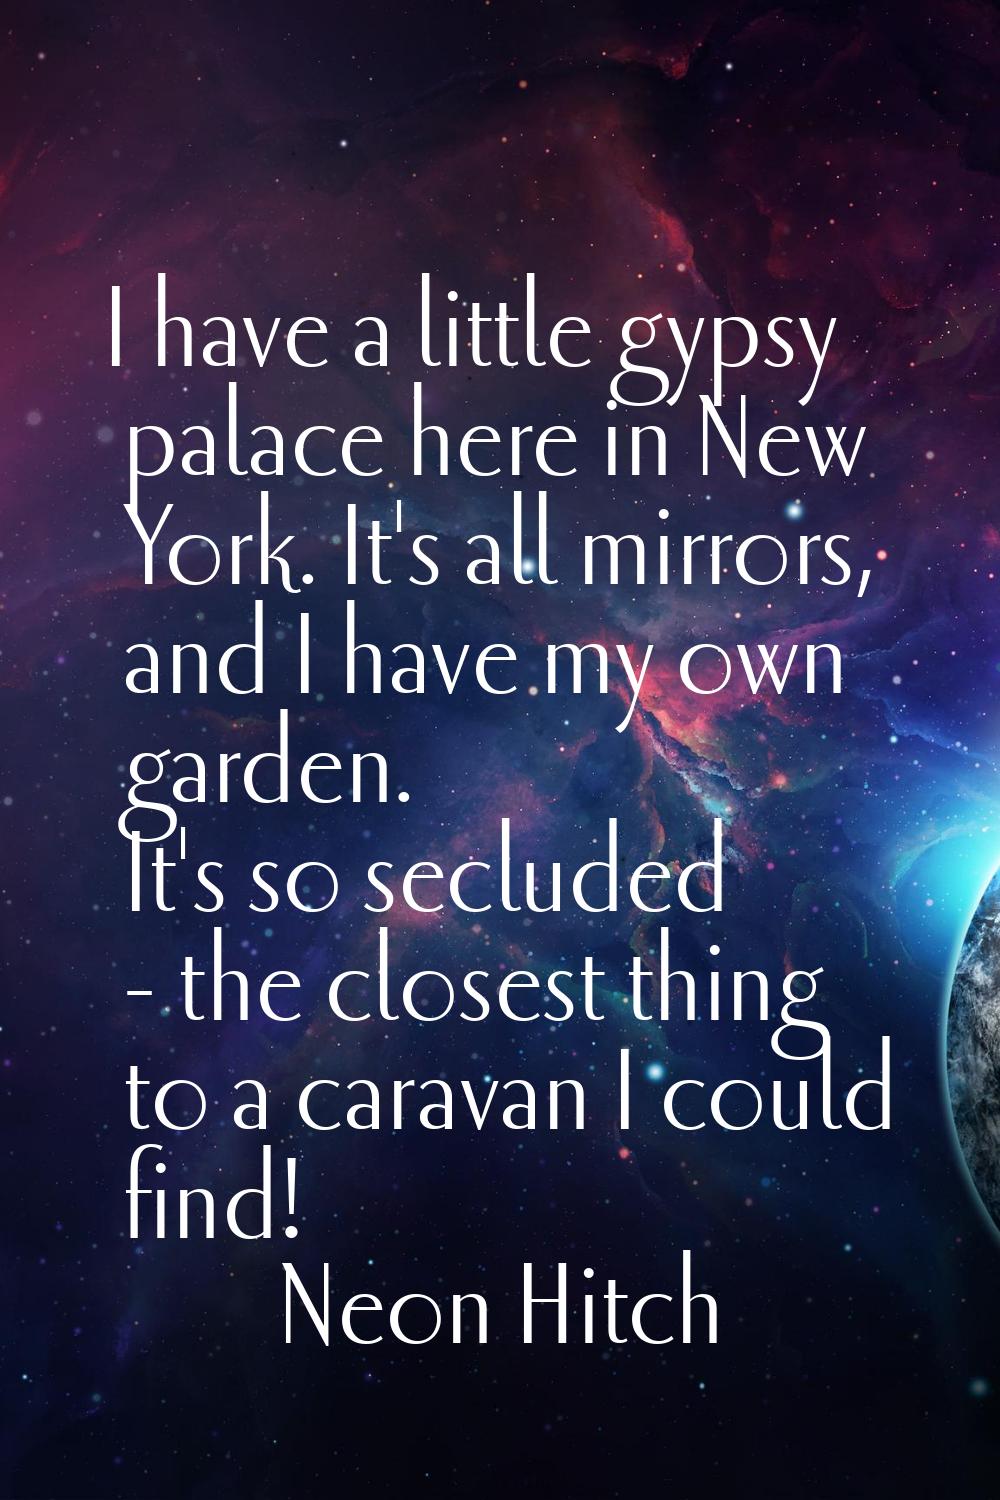 I have a little gypsy palace here in New York. It's all mirrors, and I have my own garden. It's so 